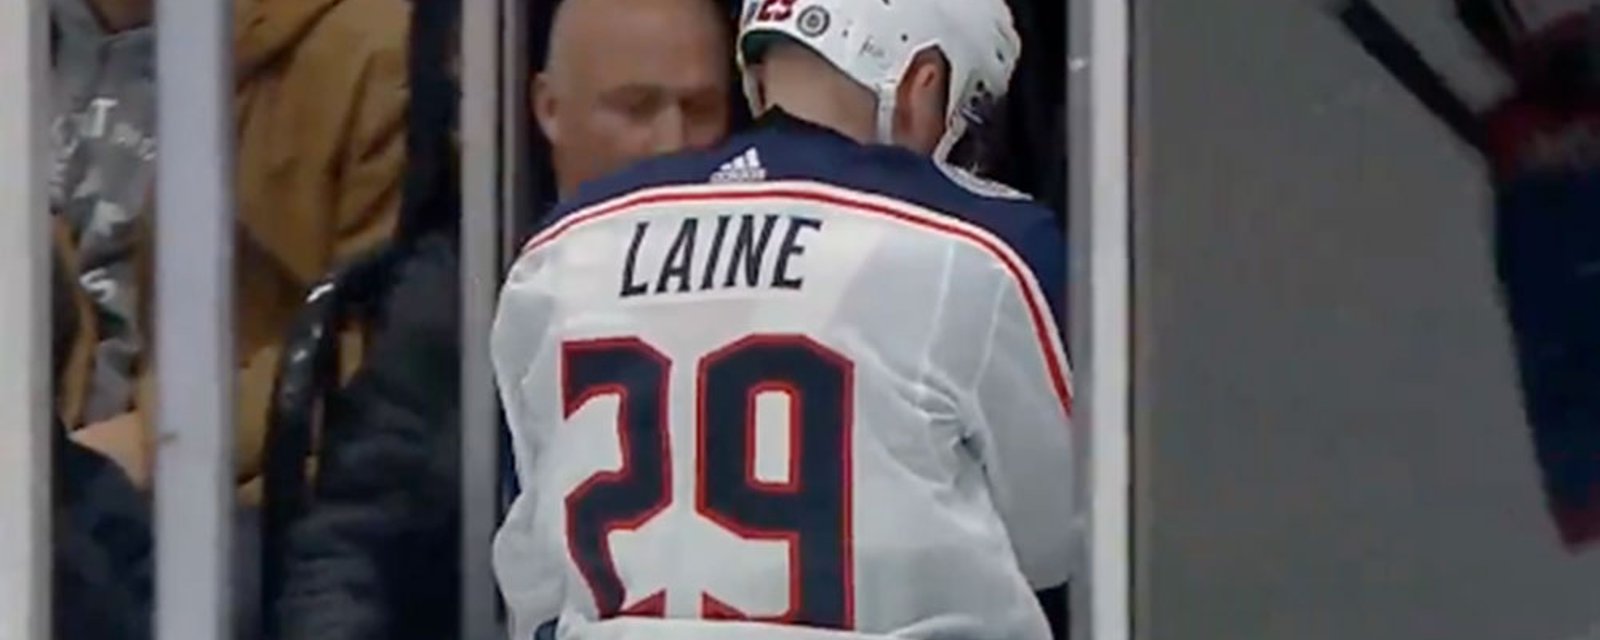 Laine suffers brutal shoulder injury after dangerous play